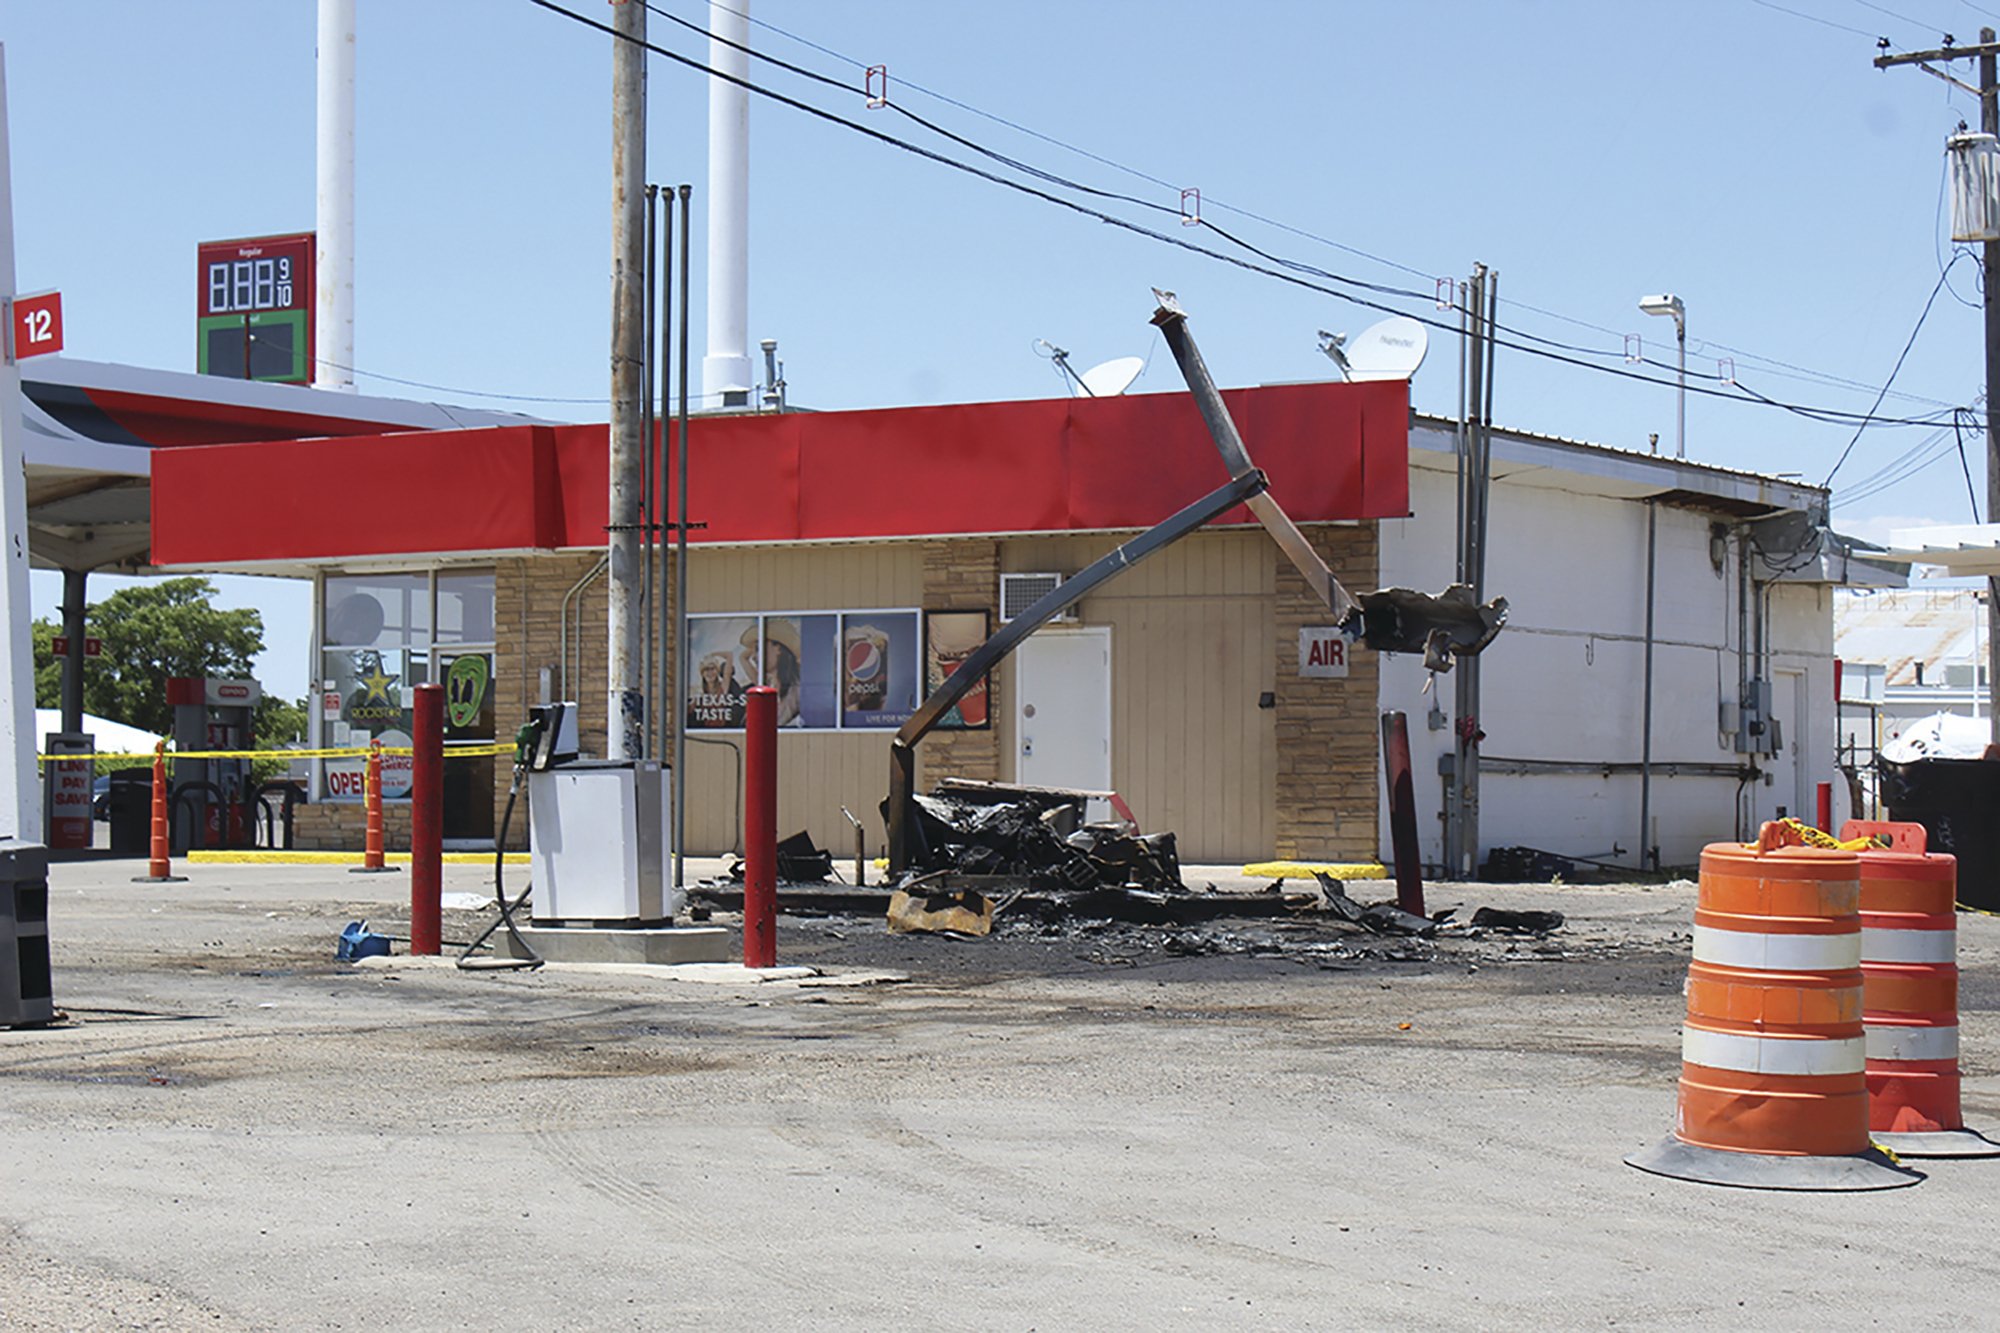 snappy gas closed up lordsburg new mexico